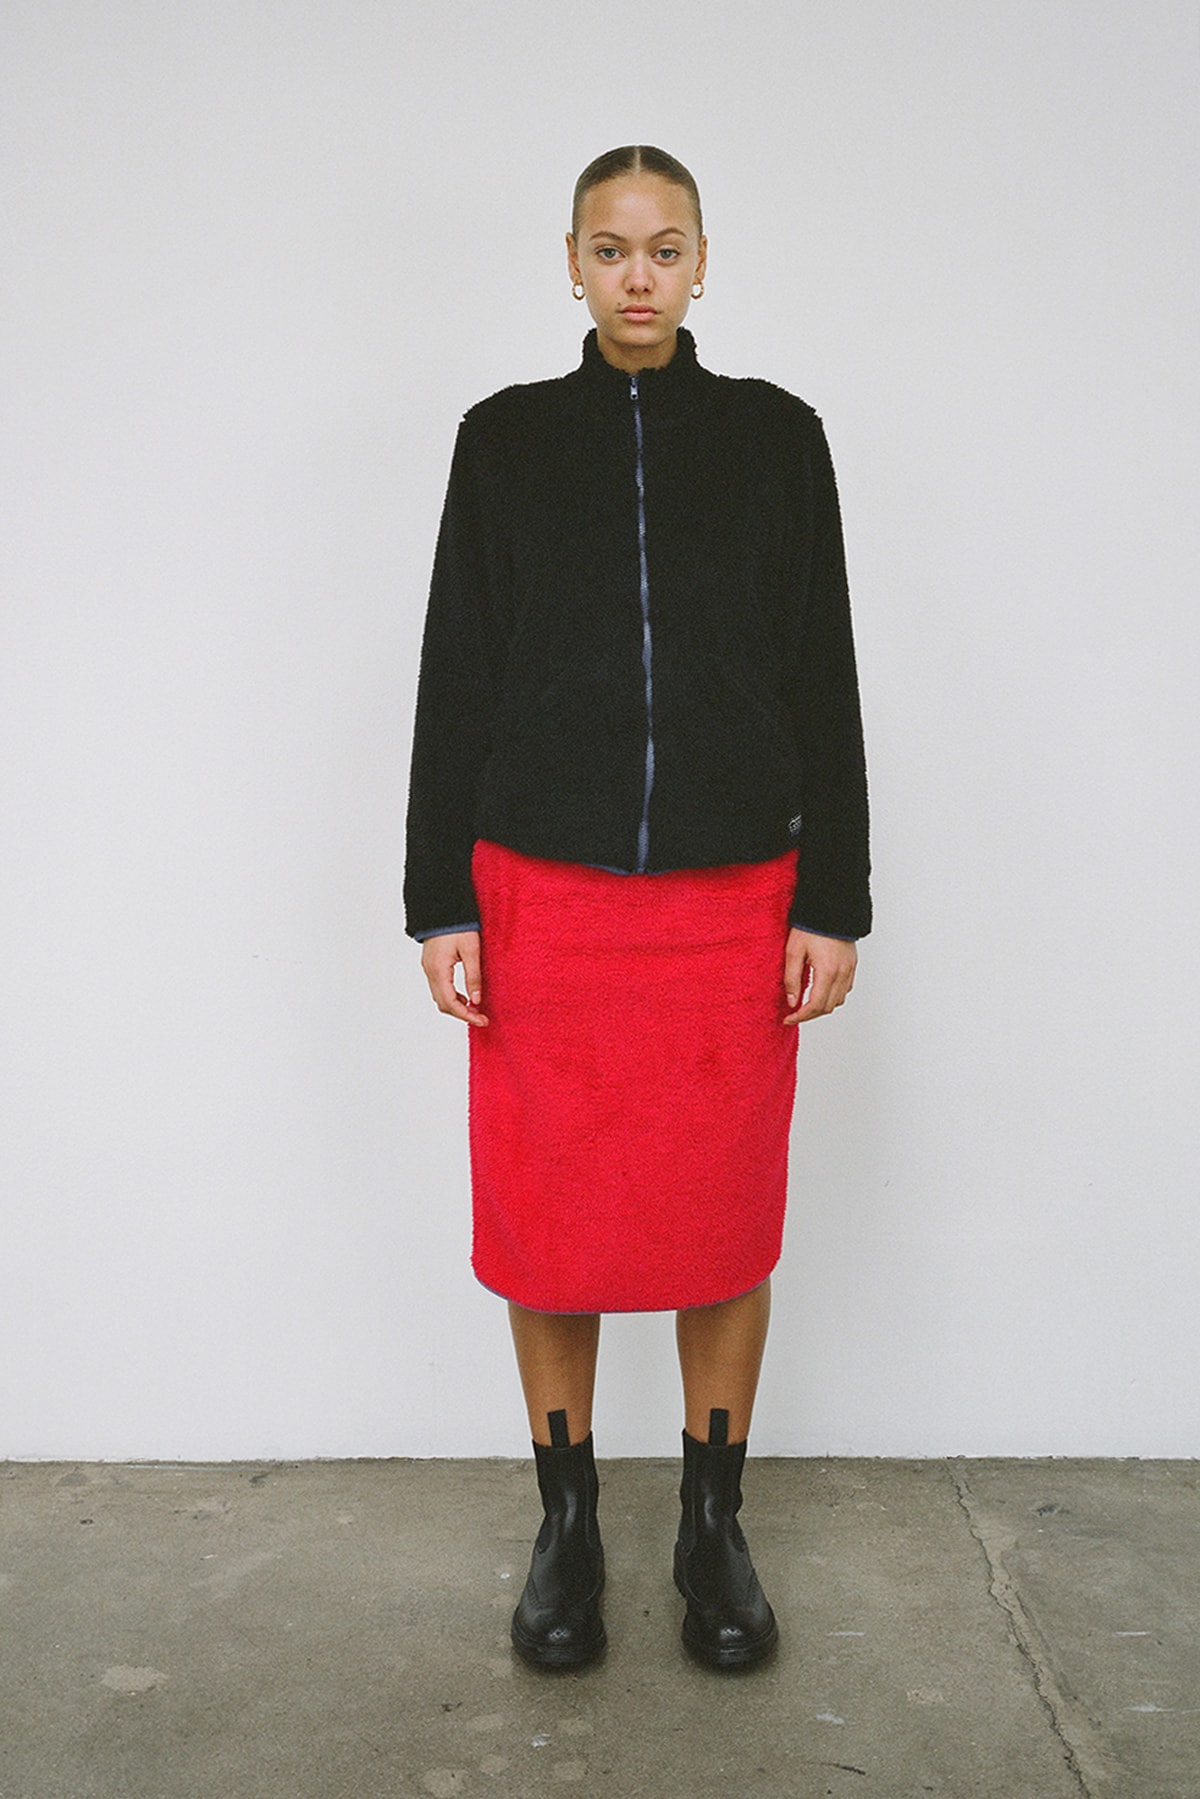 Stussy Women's Holiday 2018 Collection Lookbook Jacket Black Skirt Red